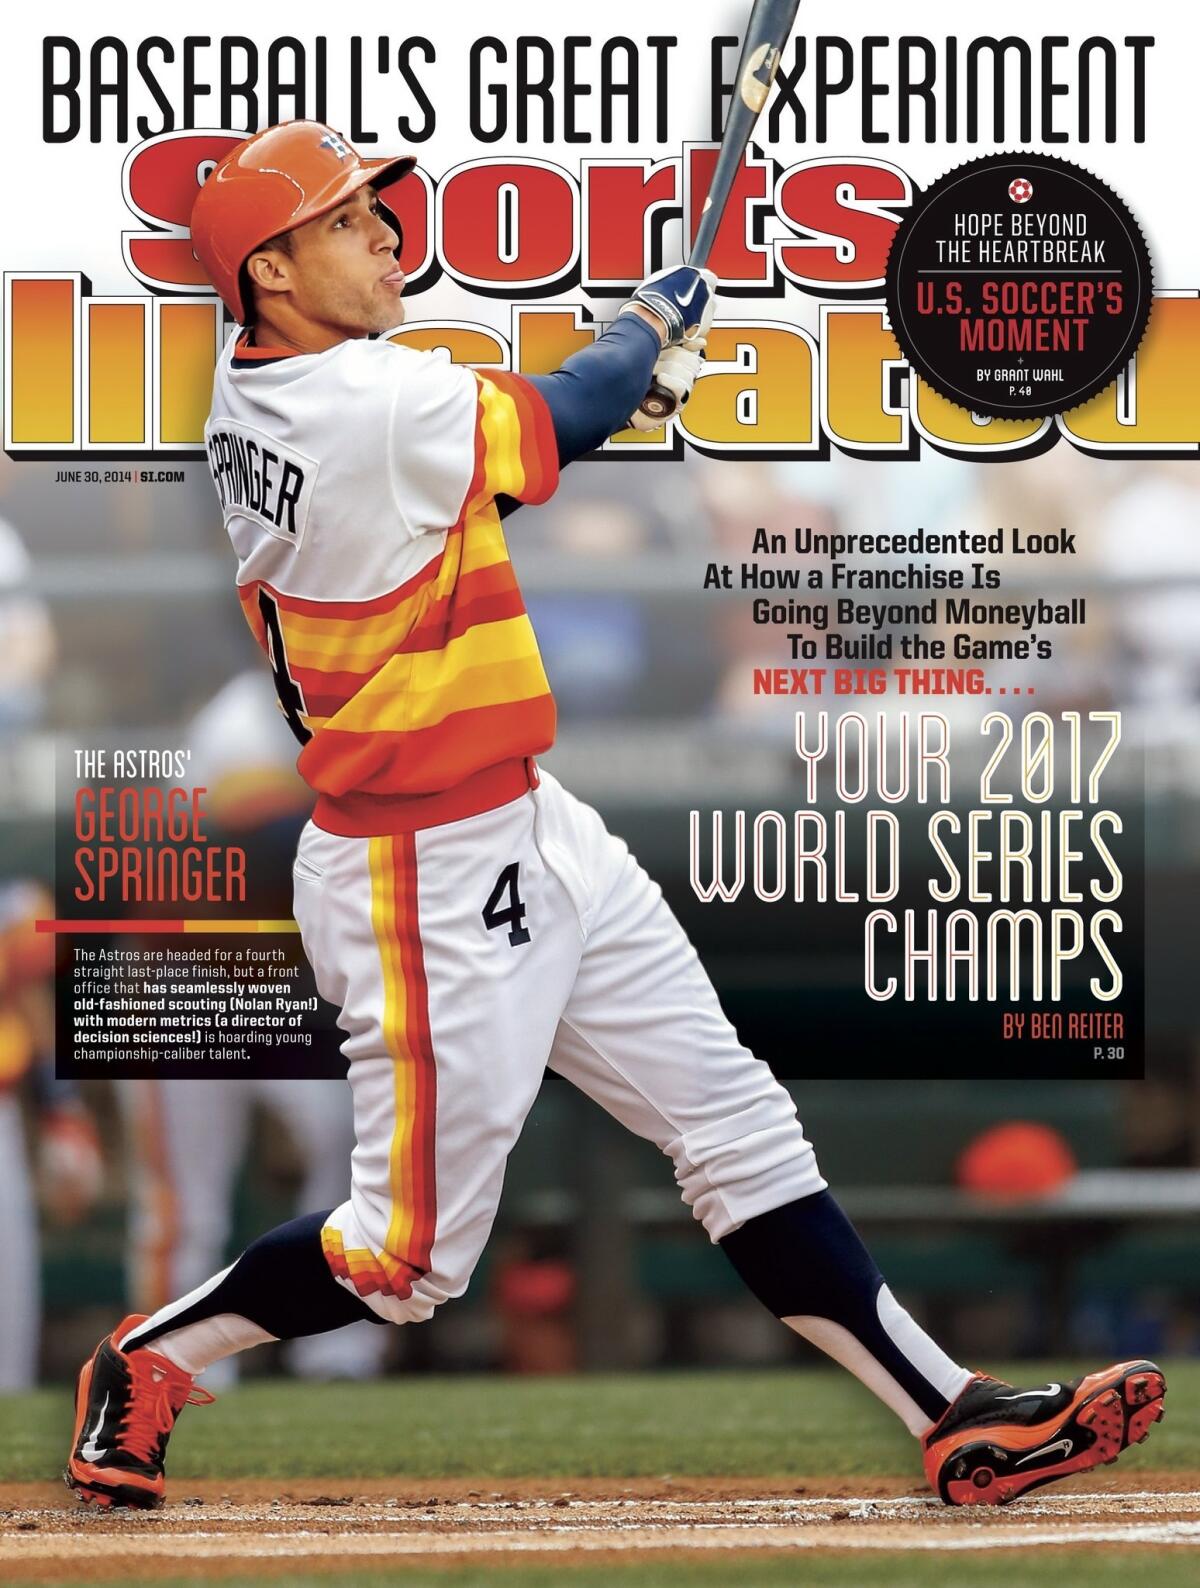 The cover Sports Illustrated ran in June 2014 predicting the Houston Astros would win the 2017 World Series shows George Springer at bat.